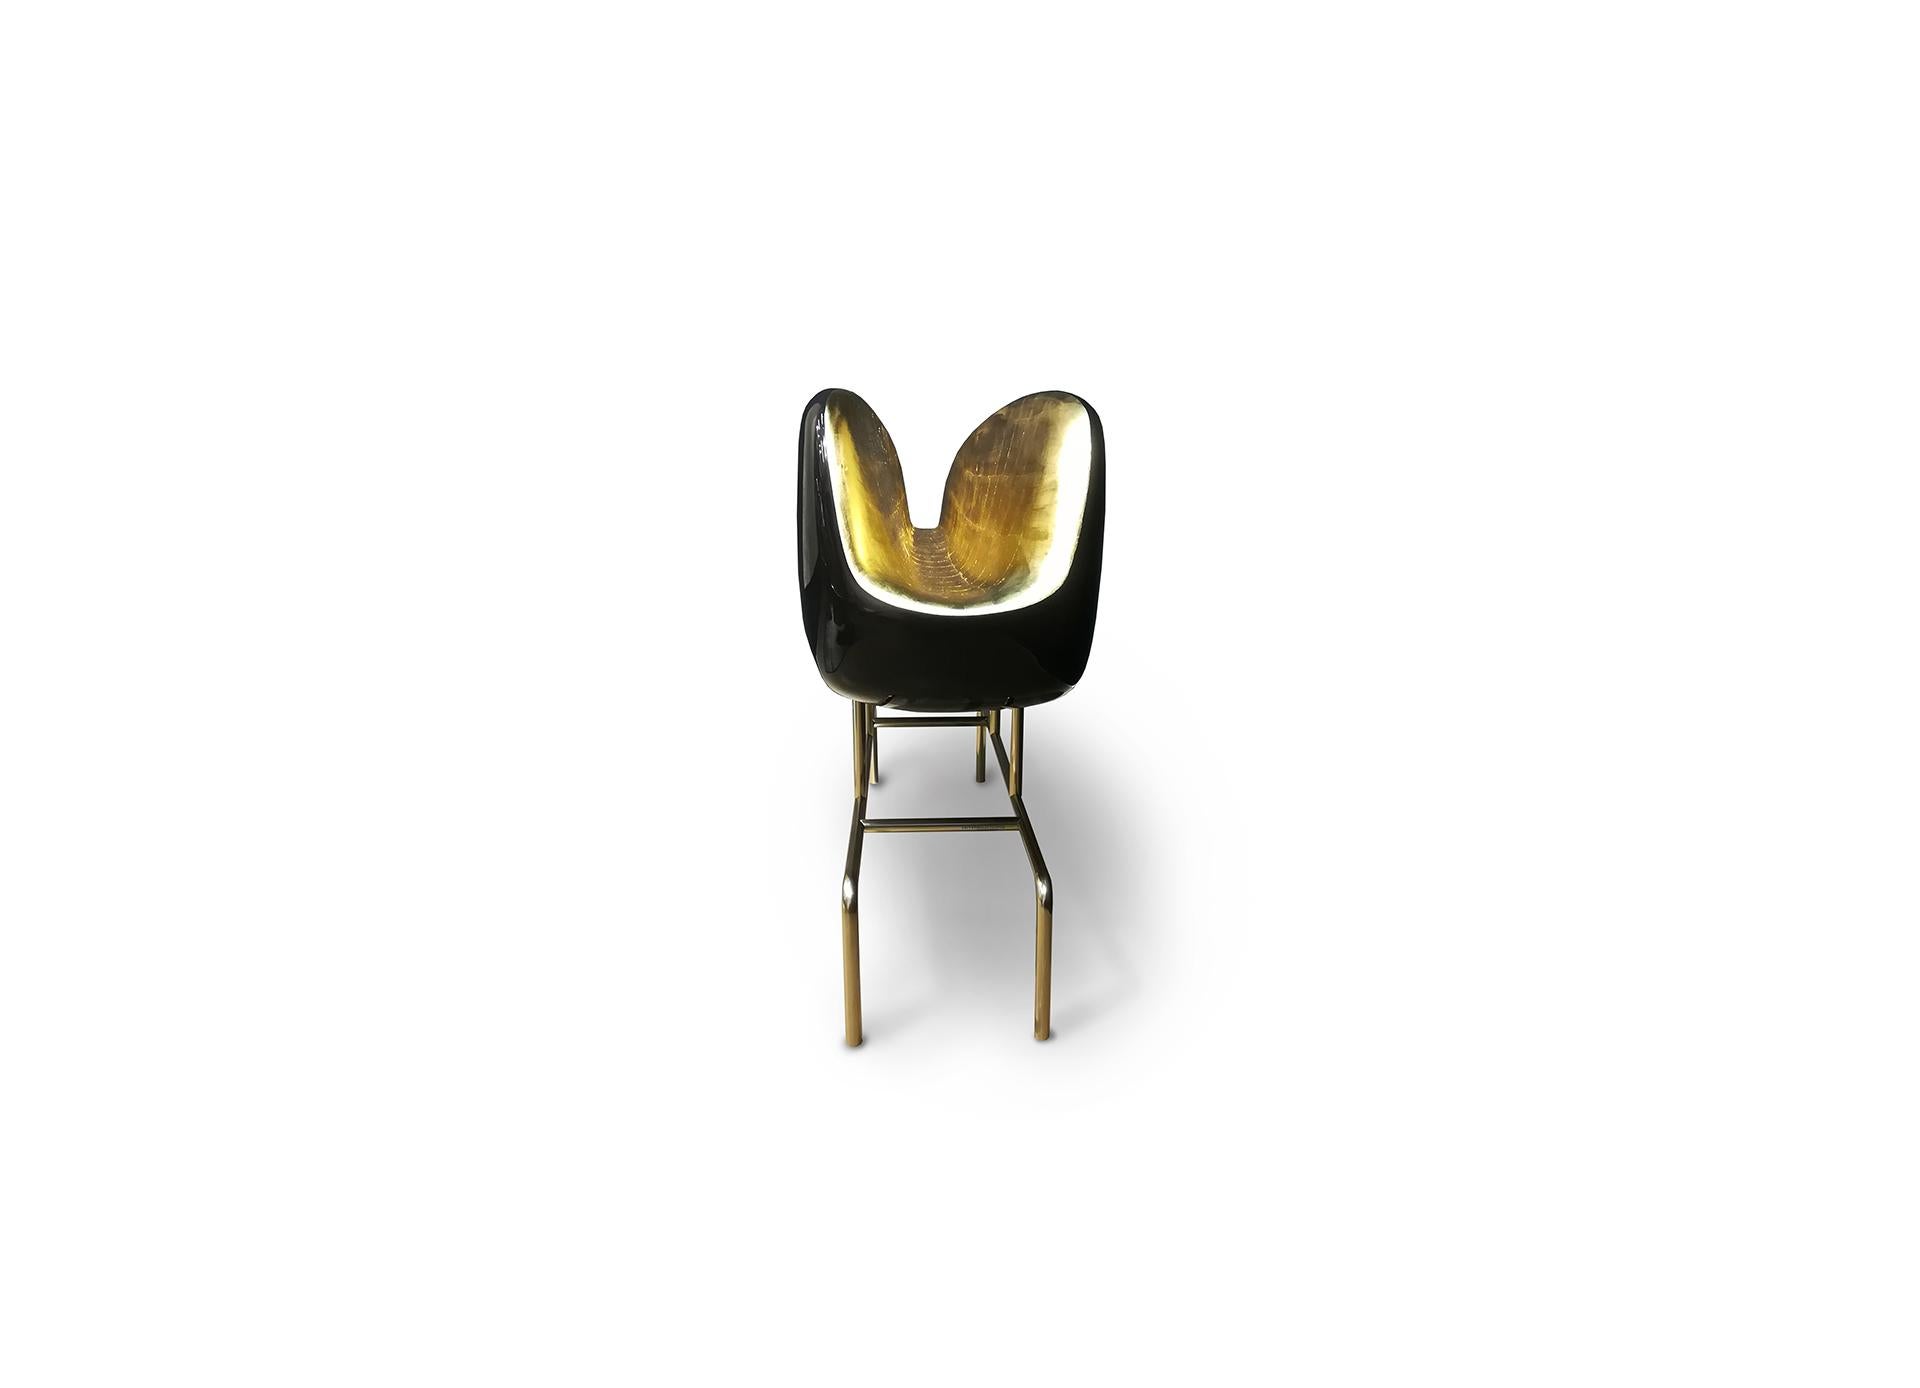 Appliqué Eden, 21st Century Black Polished Resin and Gold Leaf Collectible Design Console